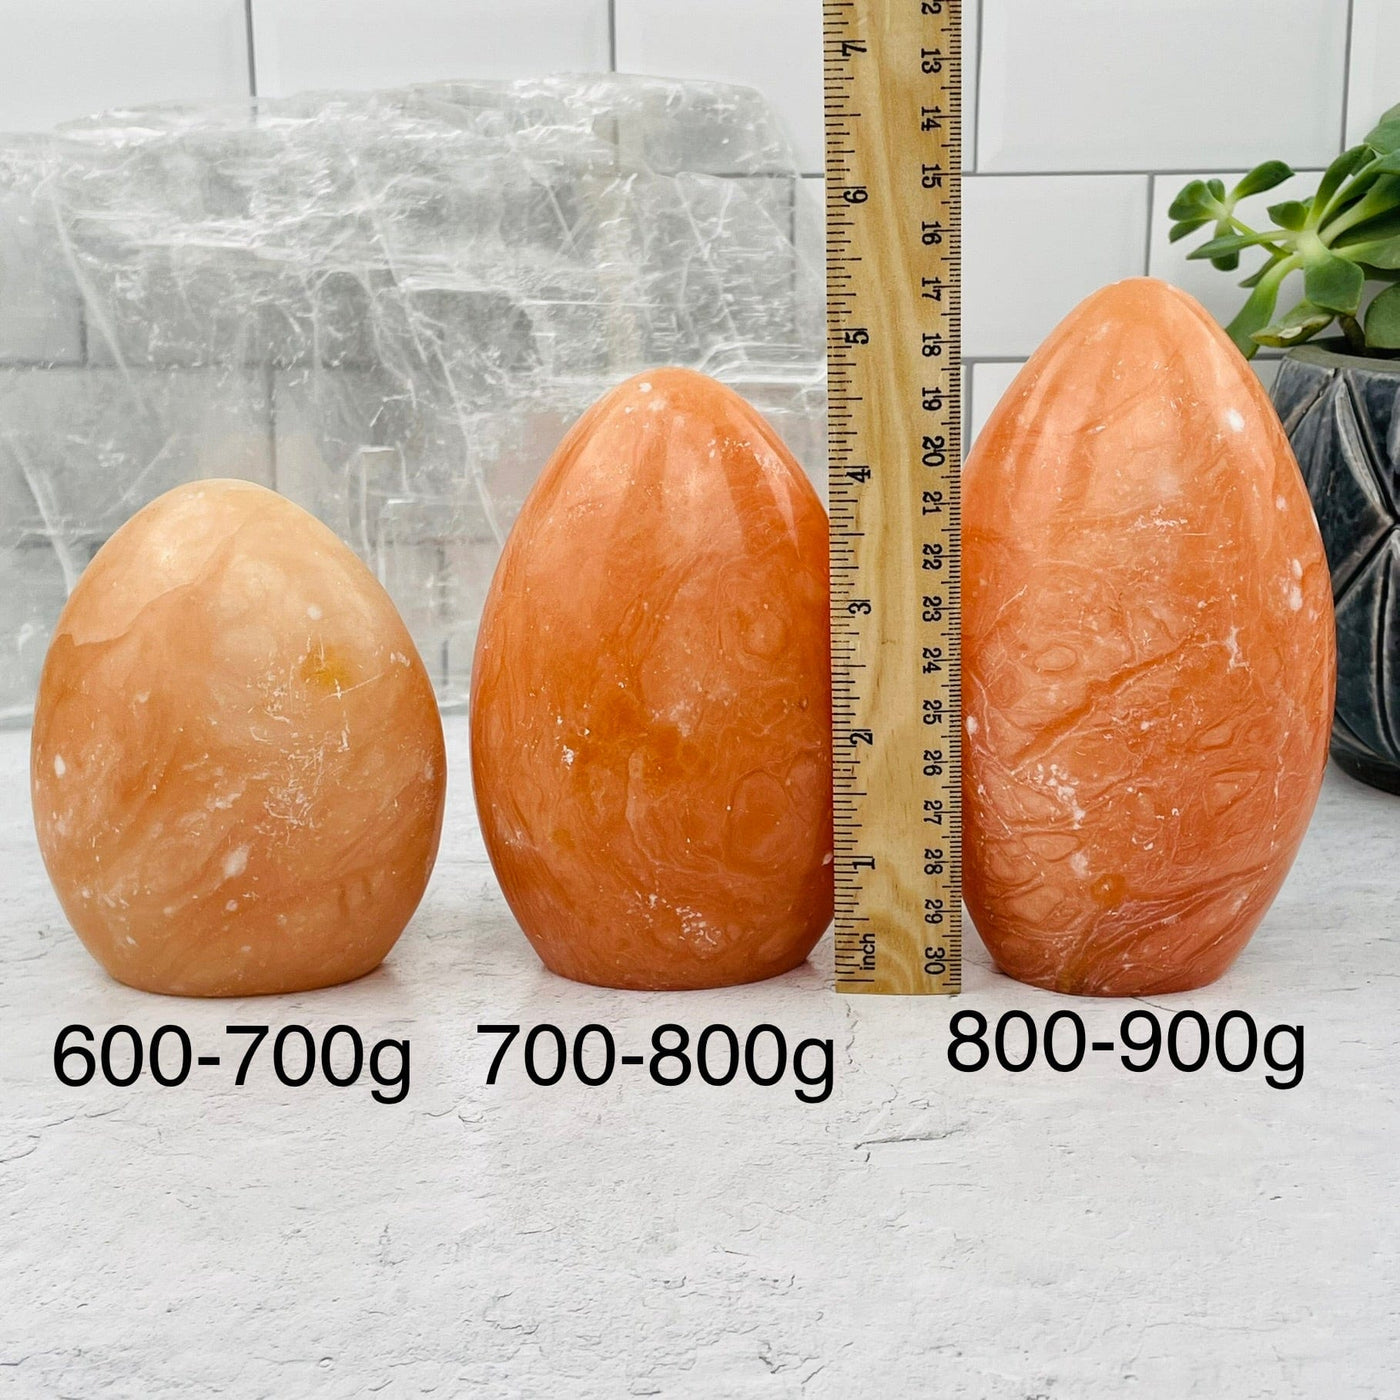 Peach Aventurine Cut Base sold by weight. displayed next to a ruler for size reference 